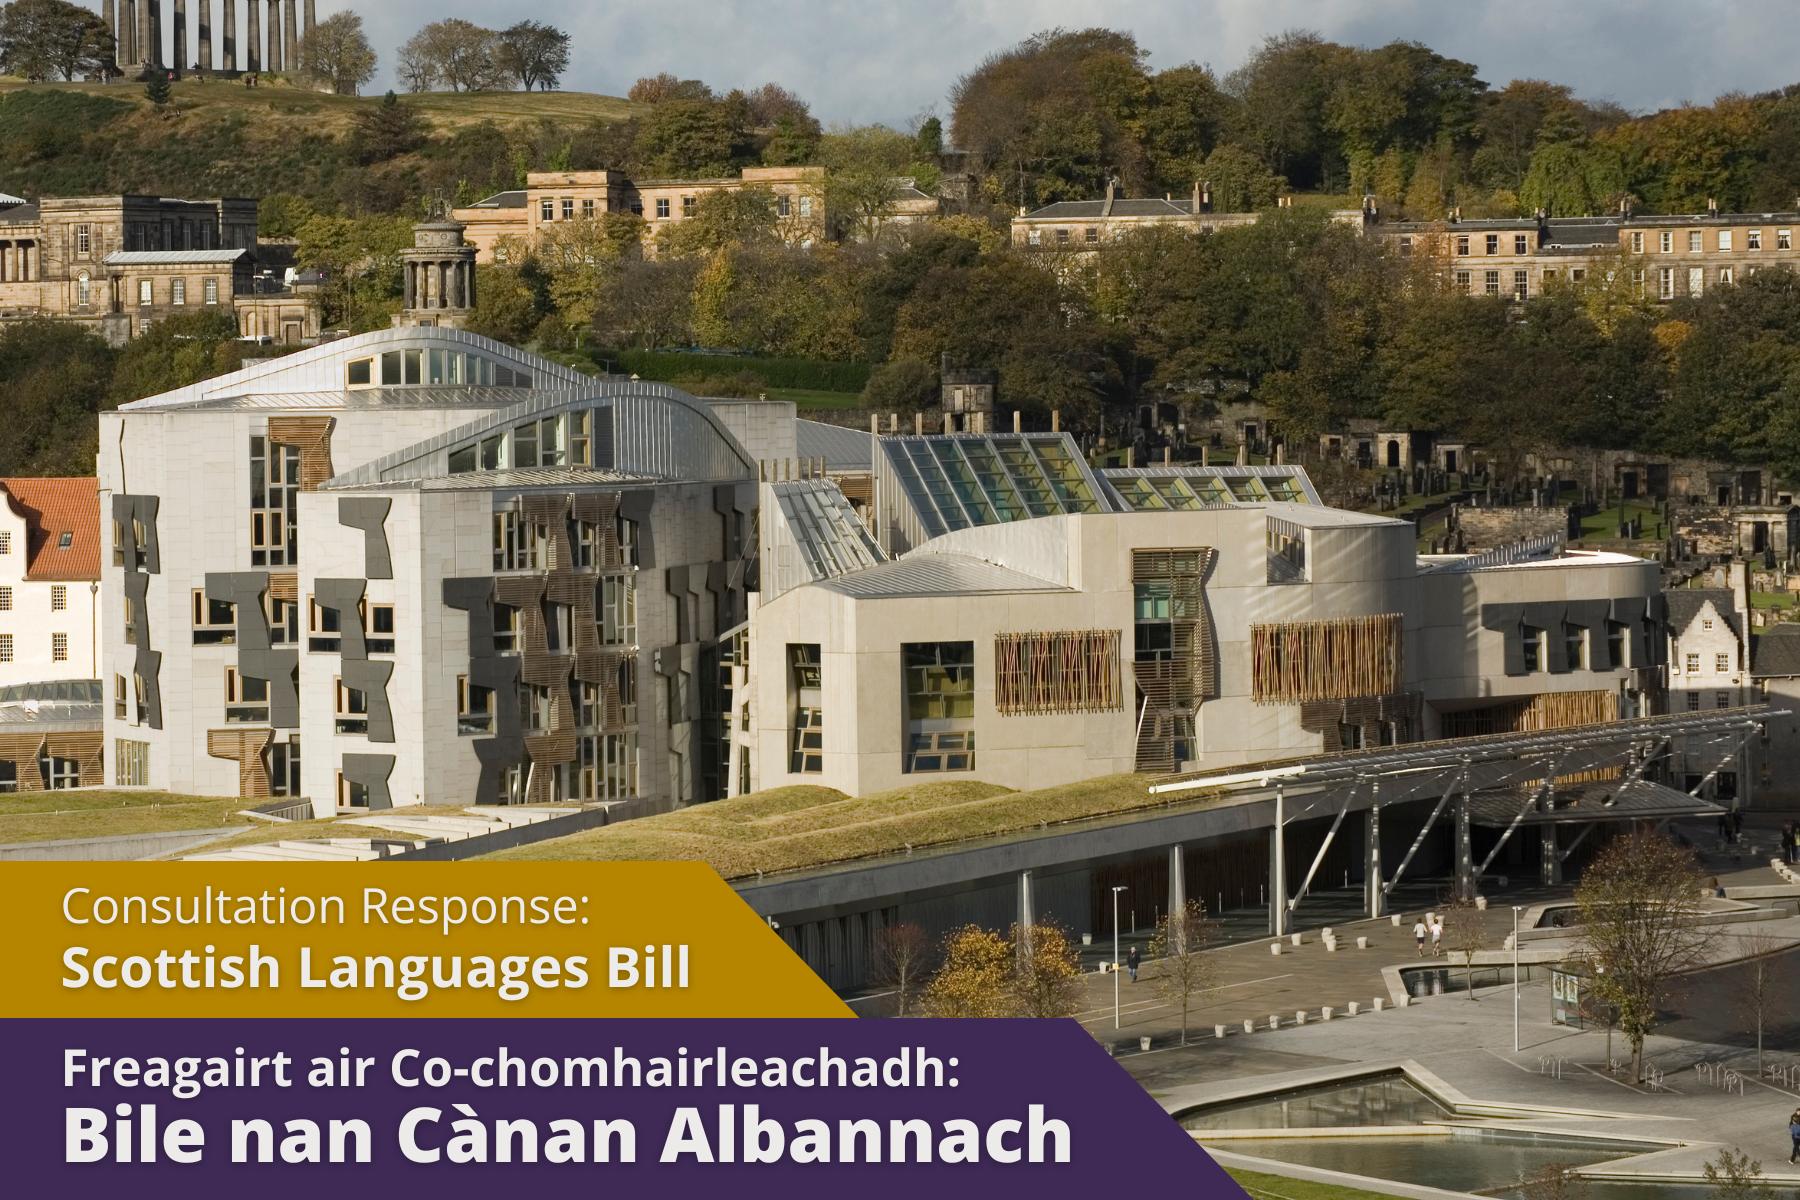 Picture: The Scottish Parliament with text over picture. Texts reads 'Consultation Response: Scottish Languages Bill'